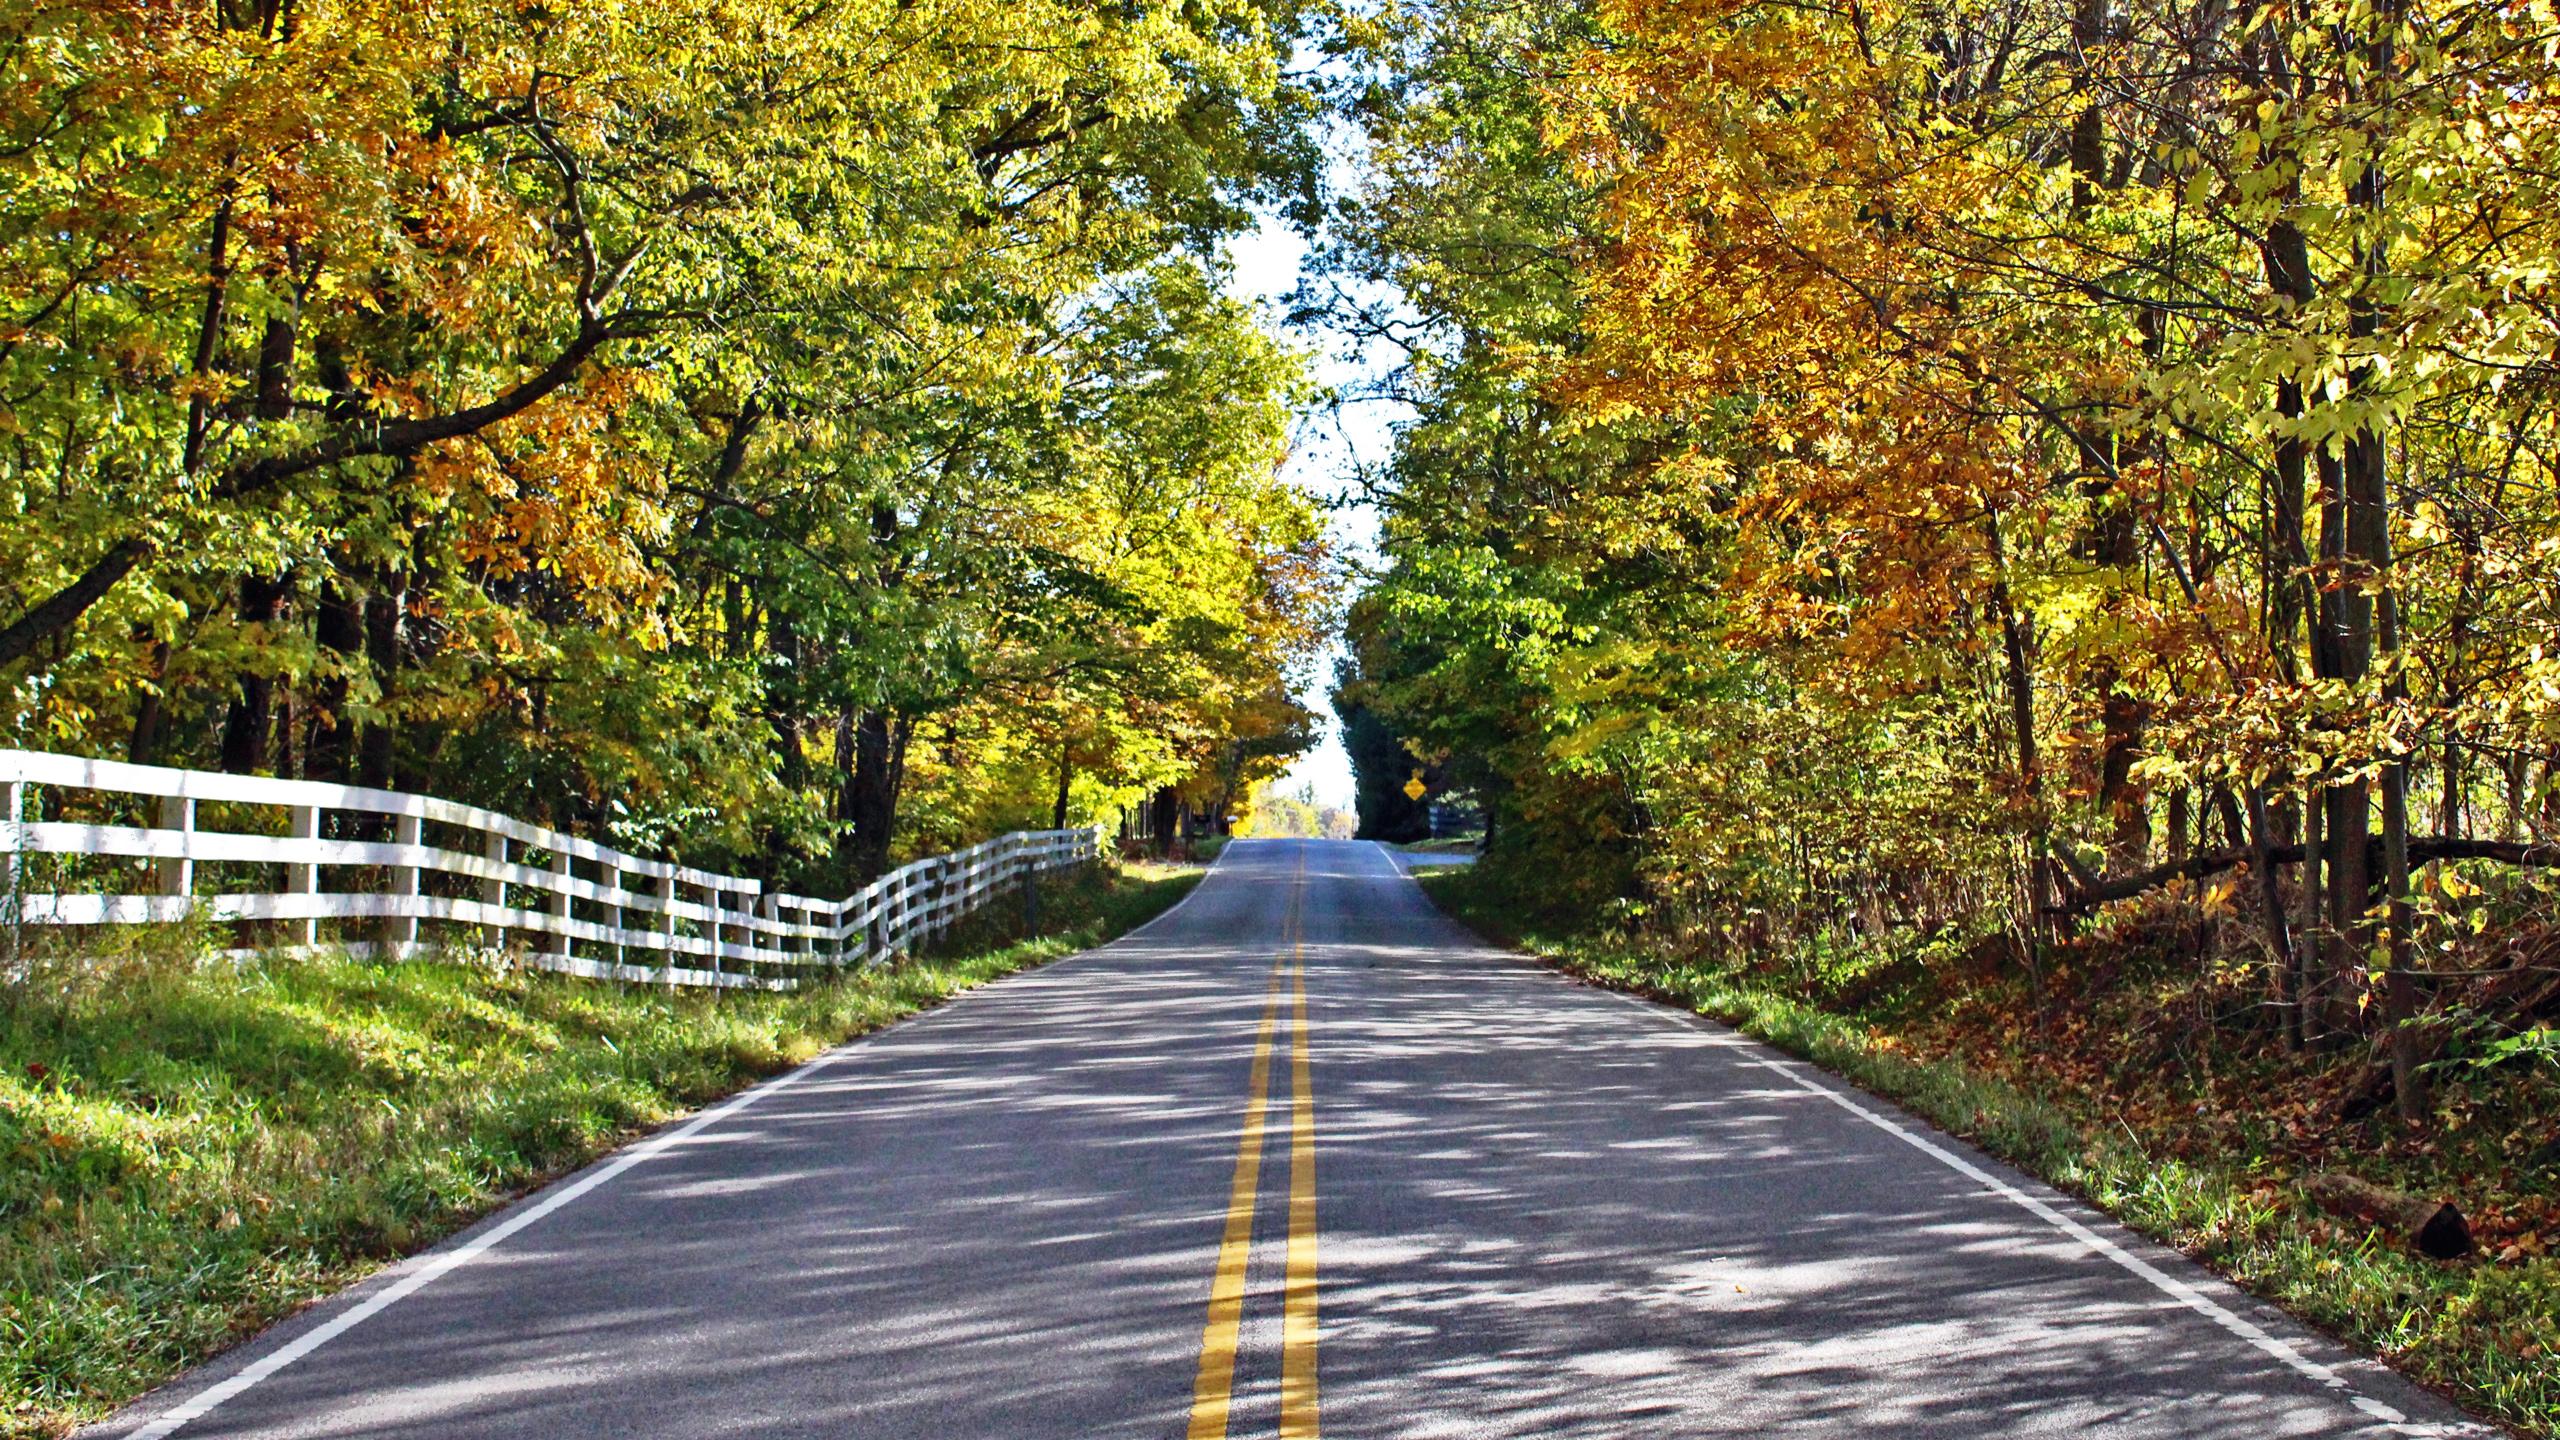 Wallpaper Indiana Autumn Country Road Background Image Desktop